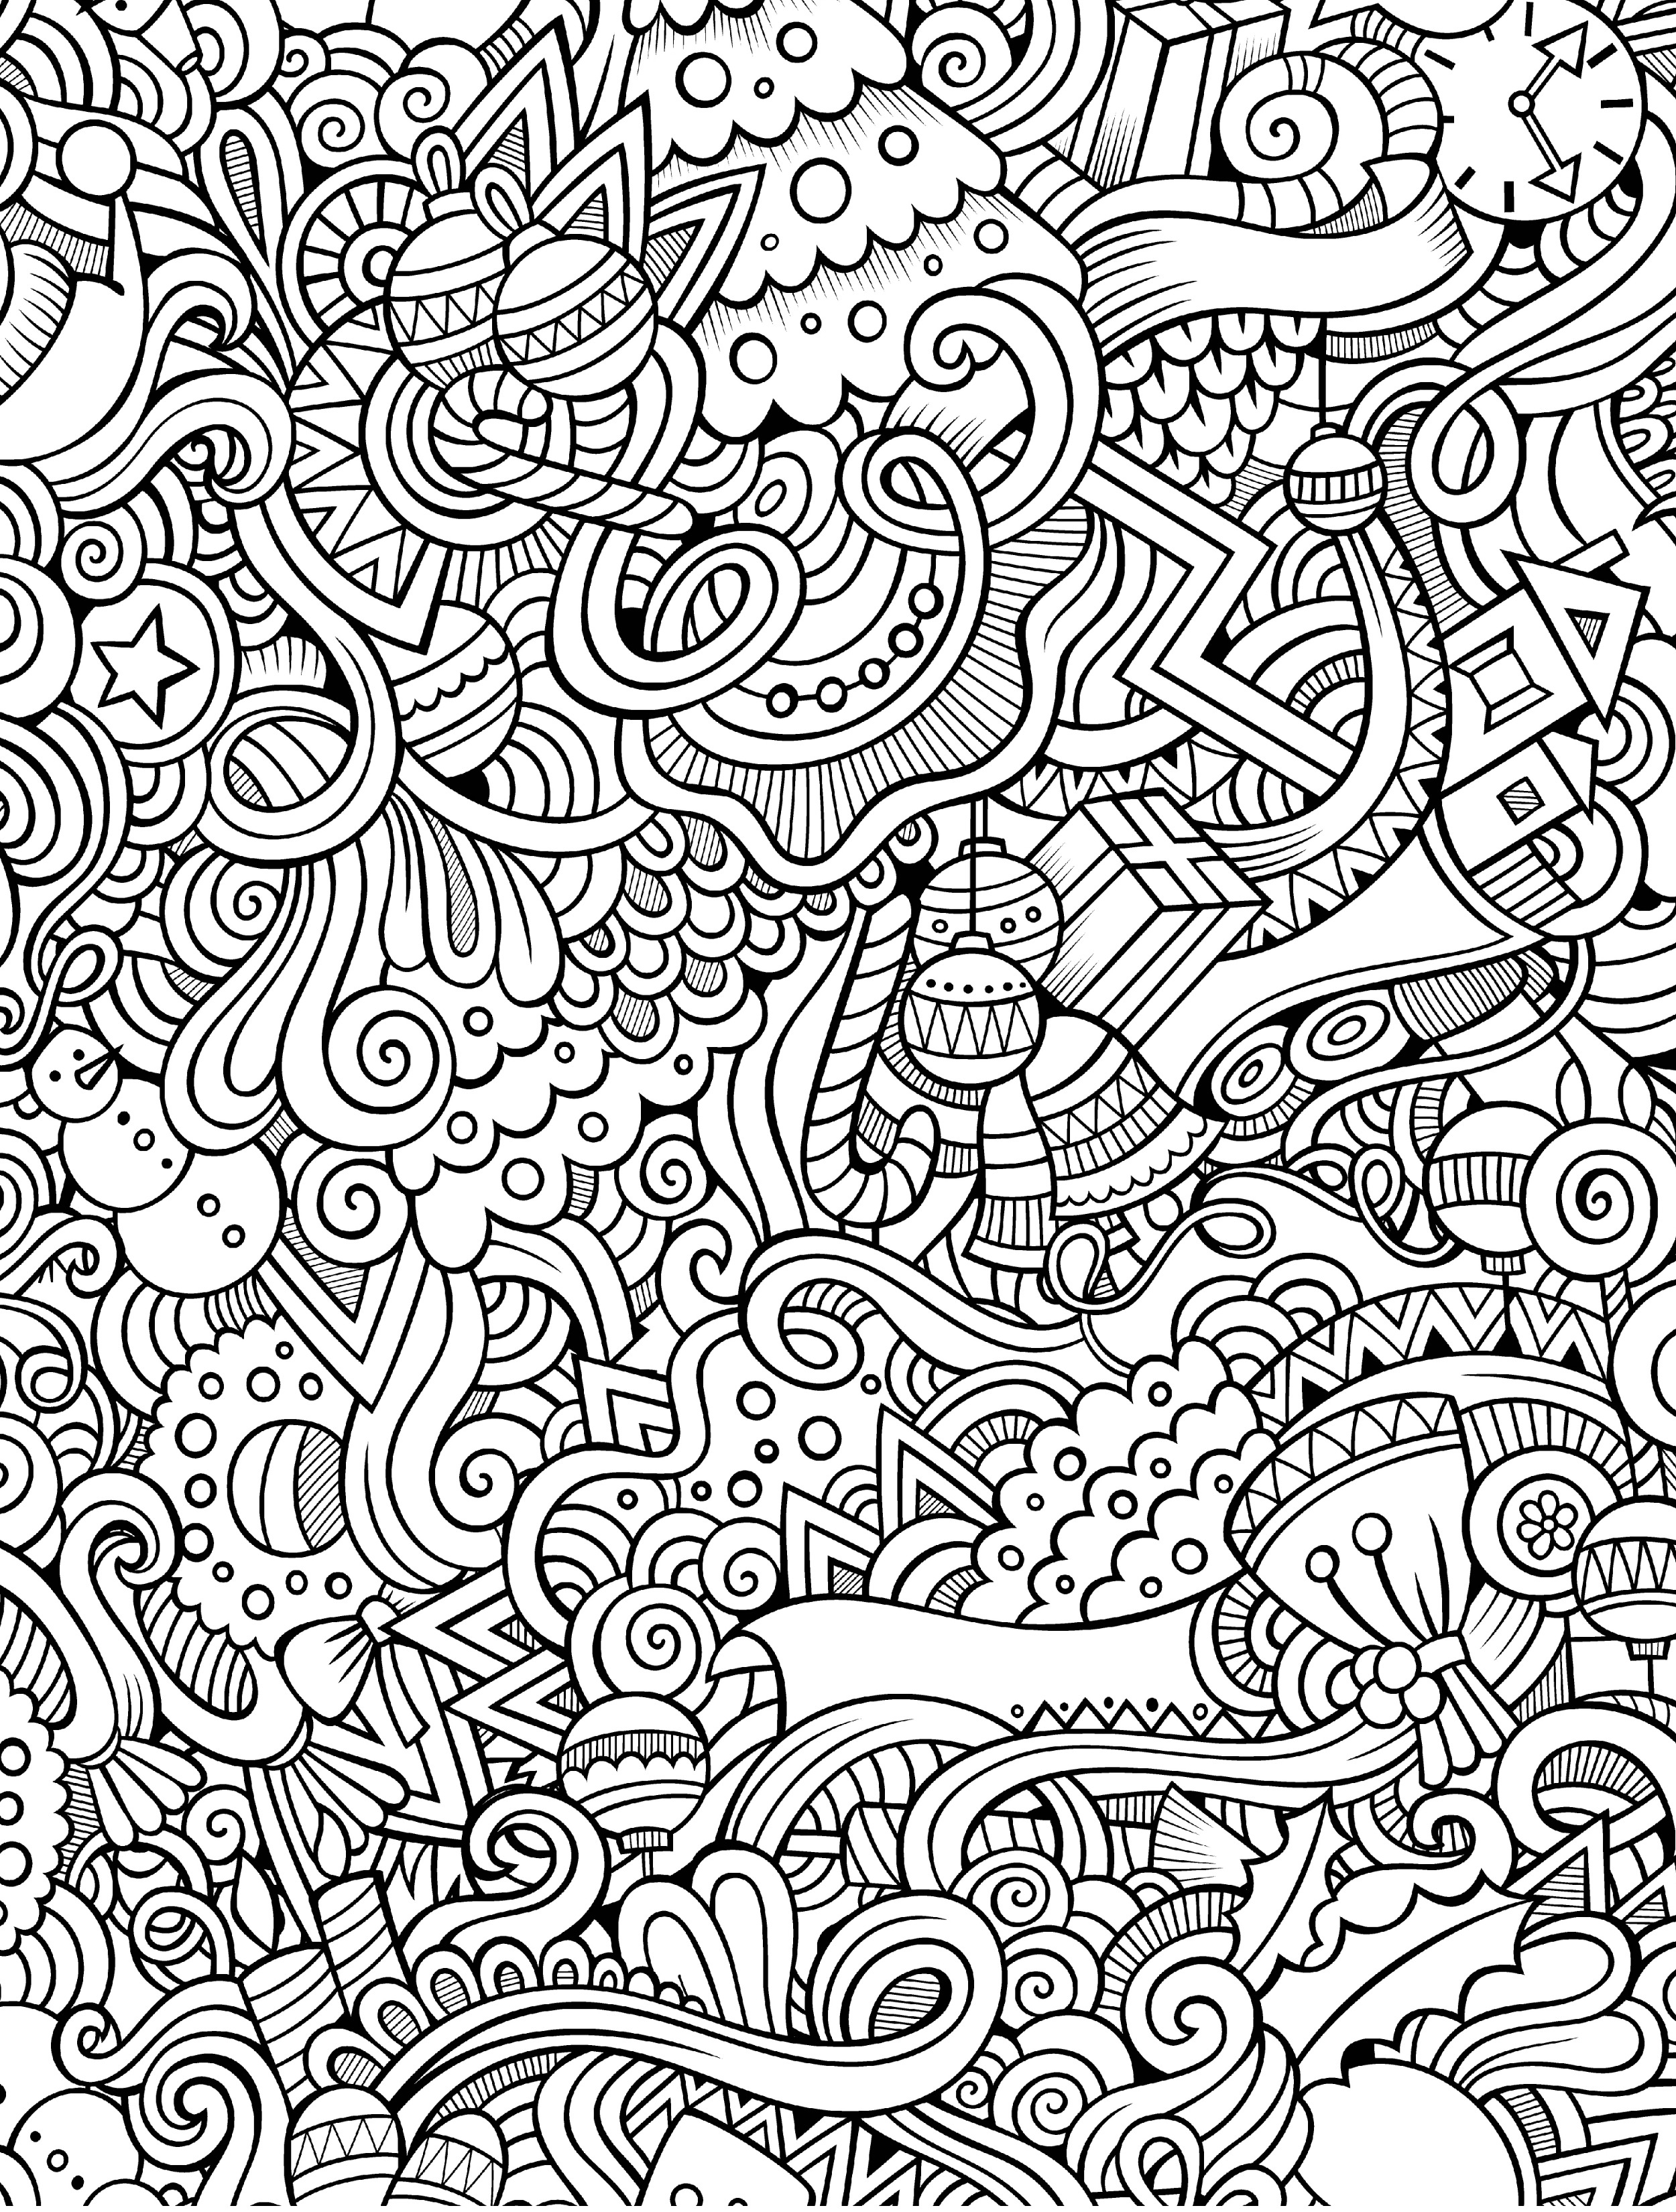 10 Free Printable Holiday Adult Coloring Pages - Free Printable Holiday Coloring Pages